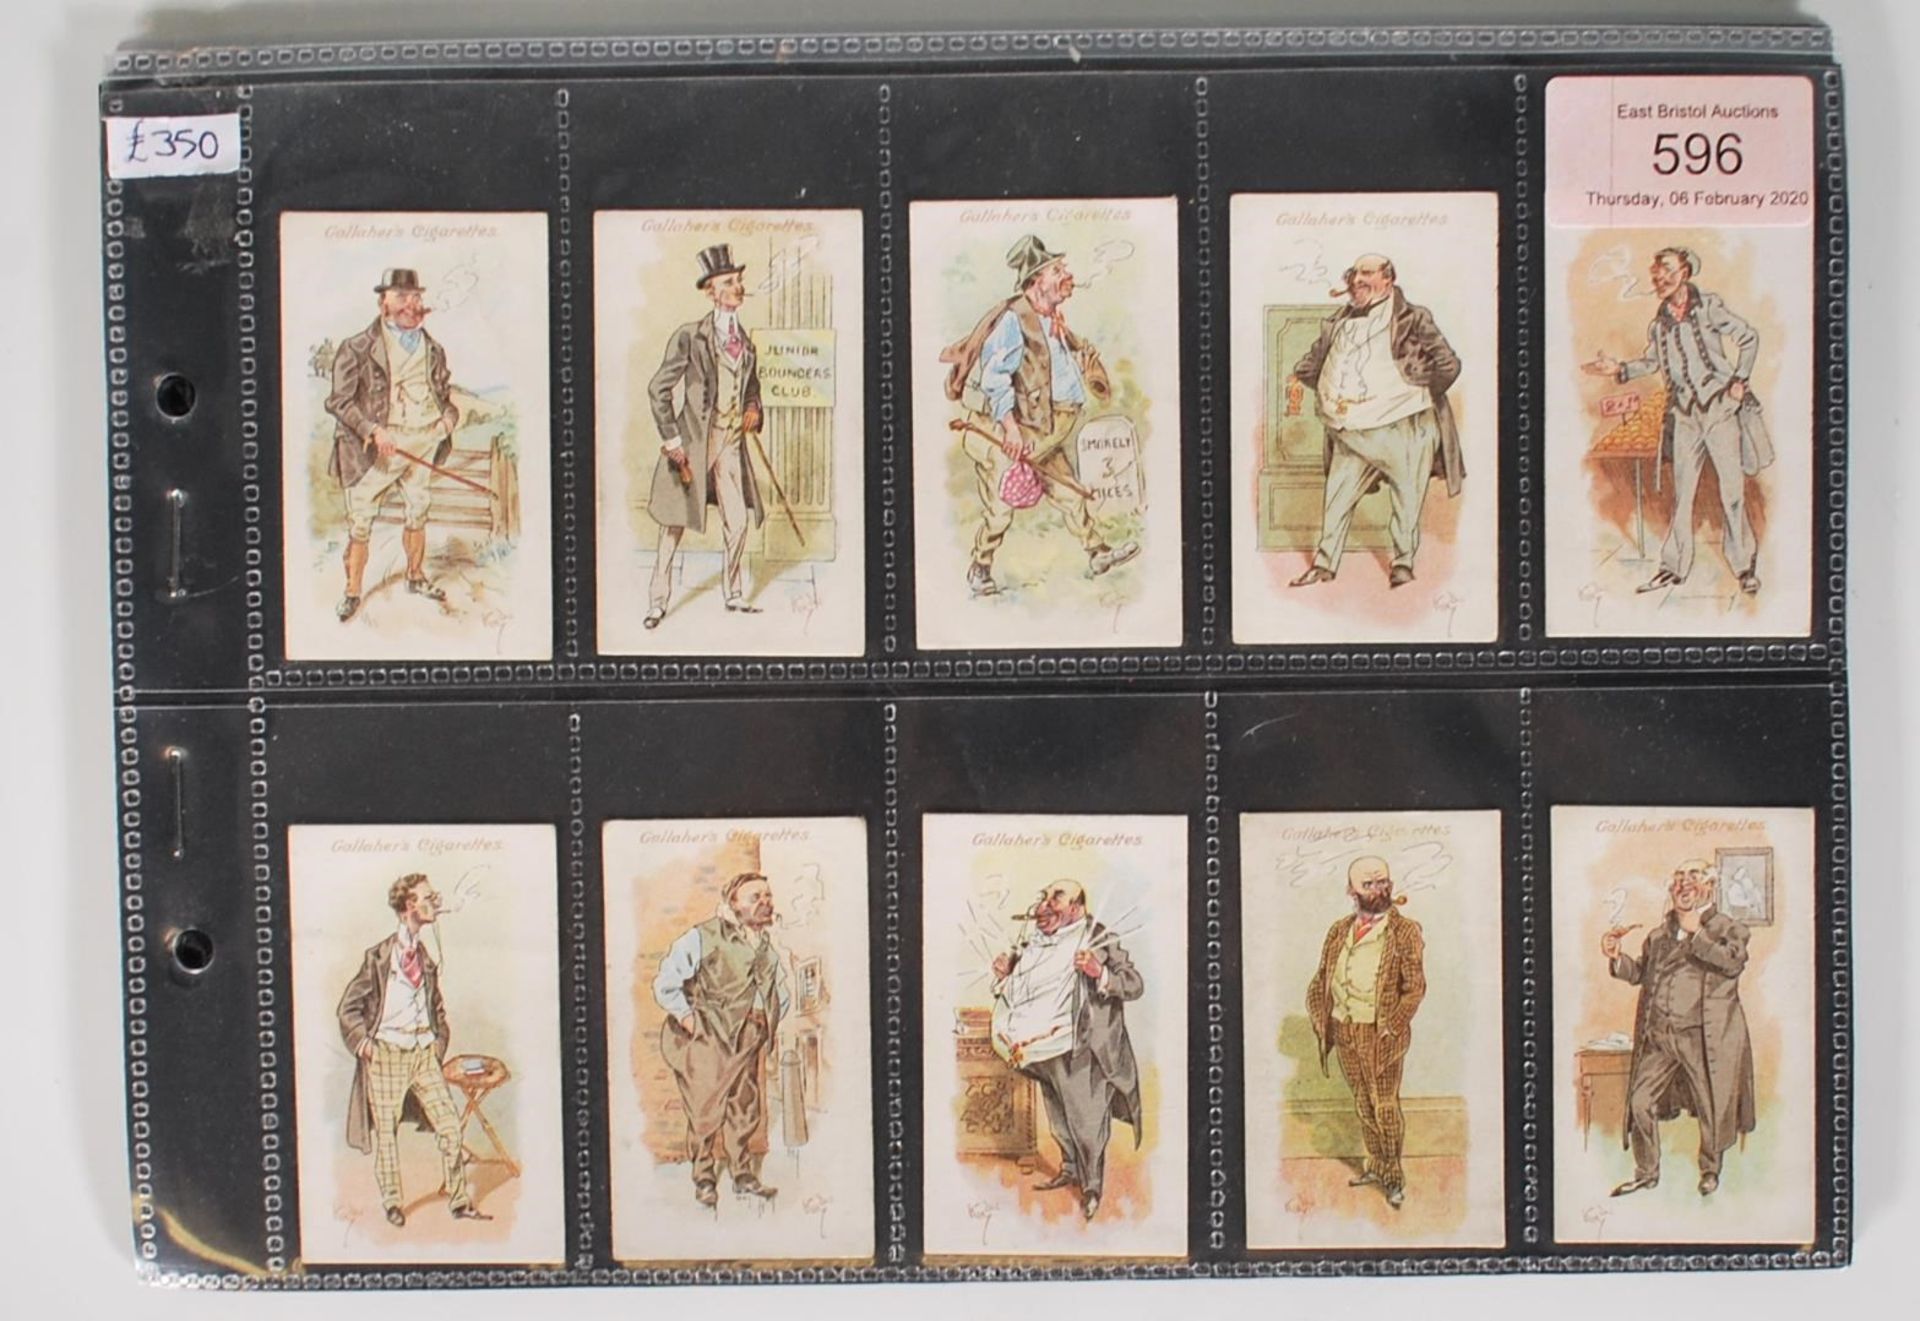 A full set of vintage Gallaher Cigarette trade cards, Votaries Of The Weed Series, complete set of